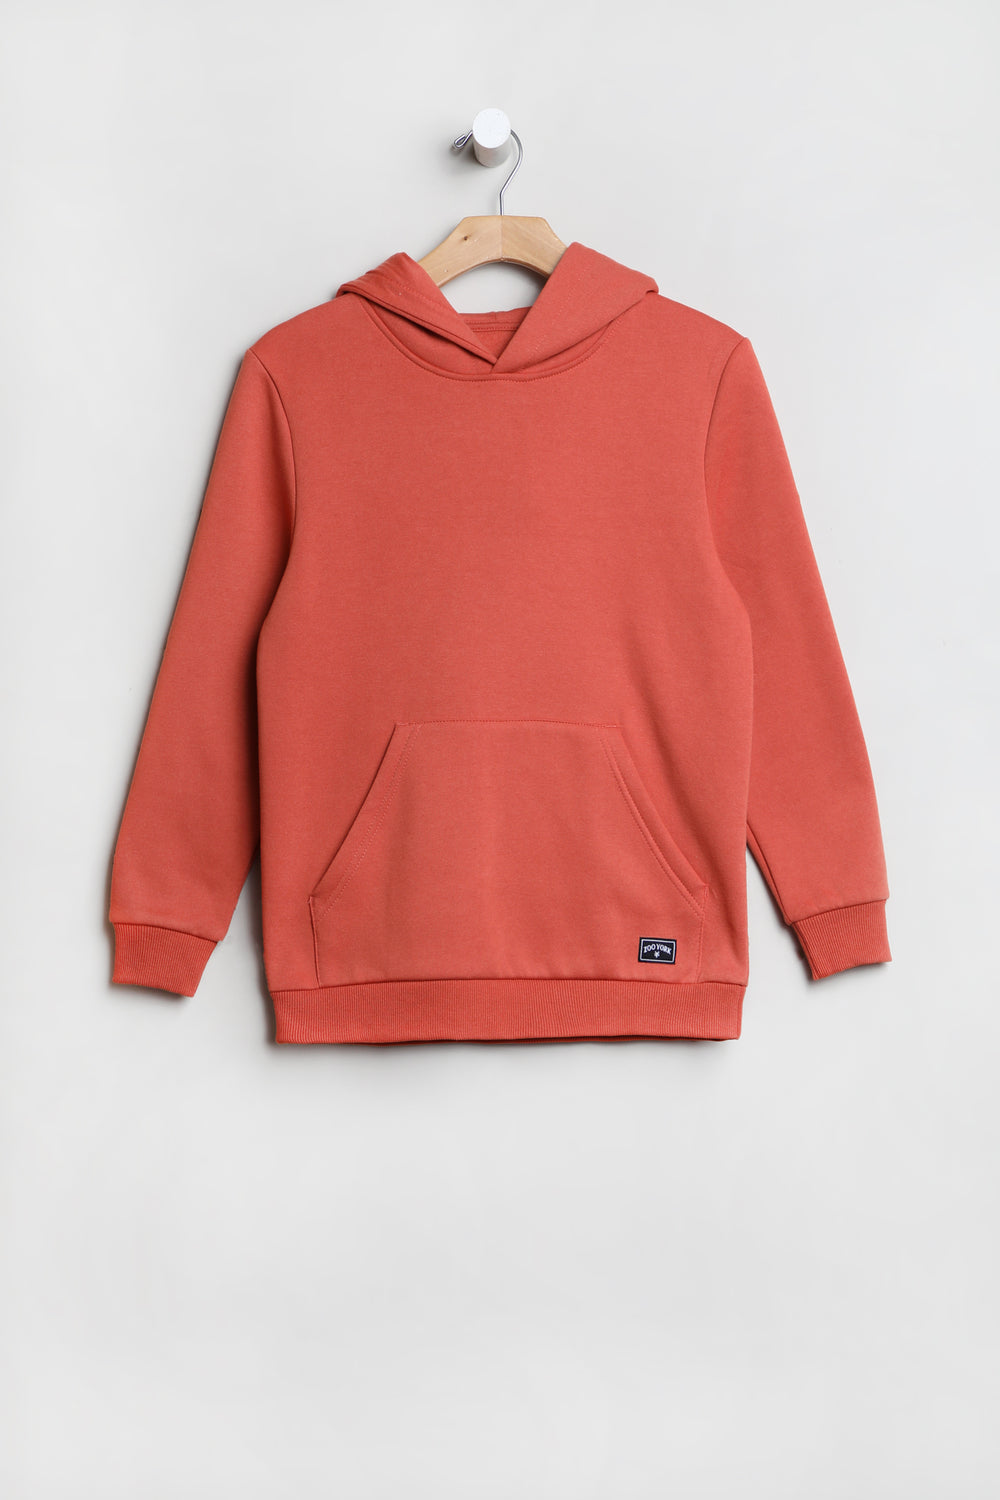 Zoo York Youth Solid Colour Hoodie Zoo York Youth Solid Colour Hoodie